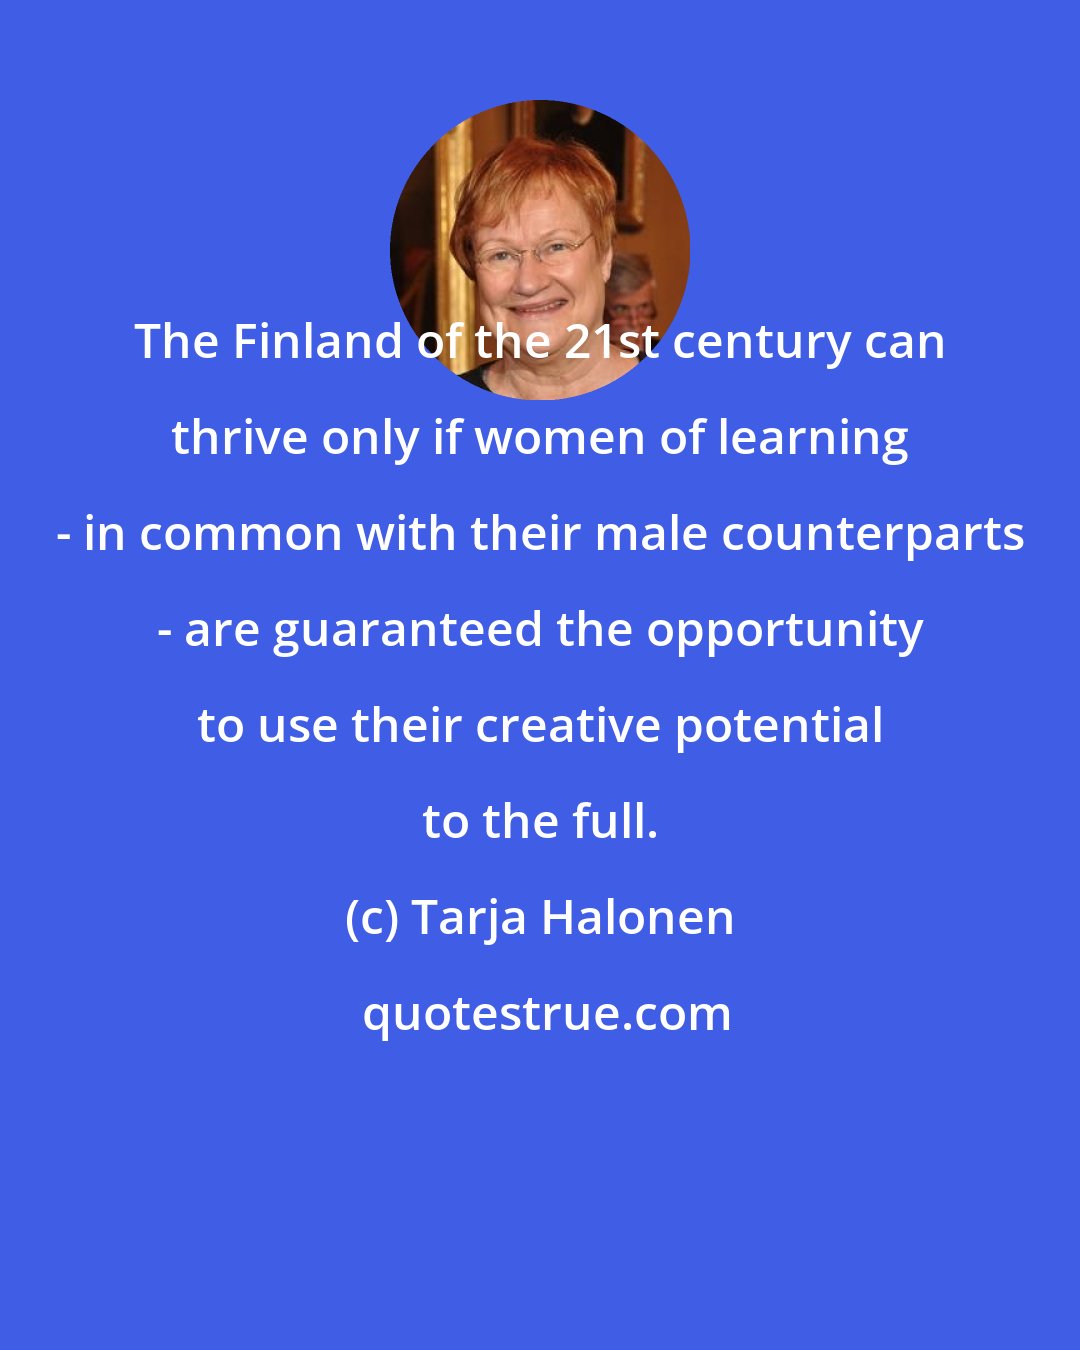 Tarja Halonen: The Finland of the 21st century can thrive only if women of learning - in common with their male counterparts - are guaranteed the opportunity to use their creative potential to the full.